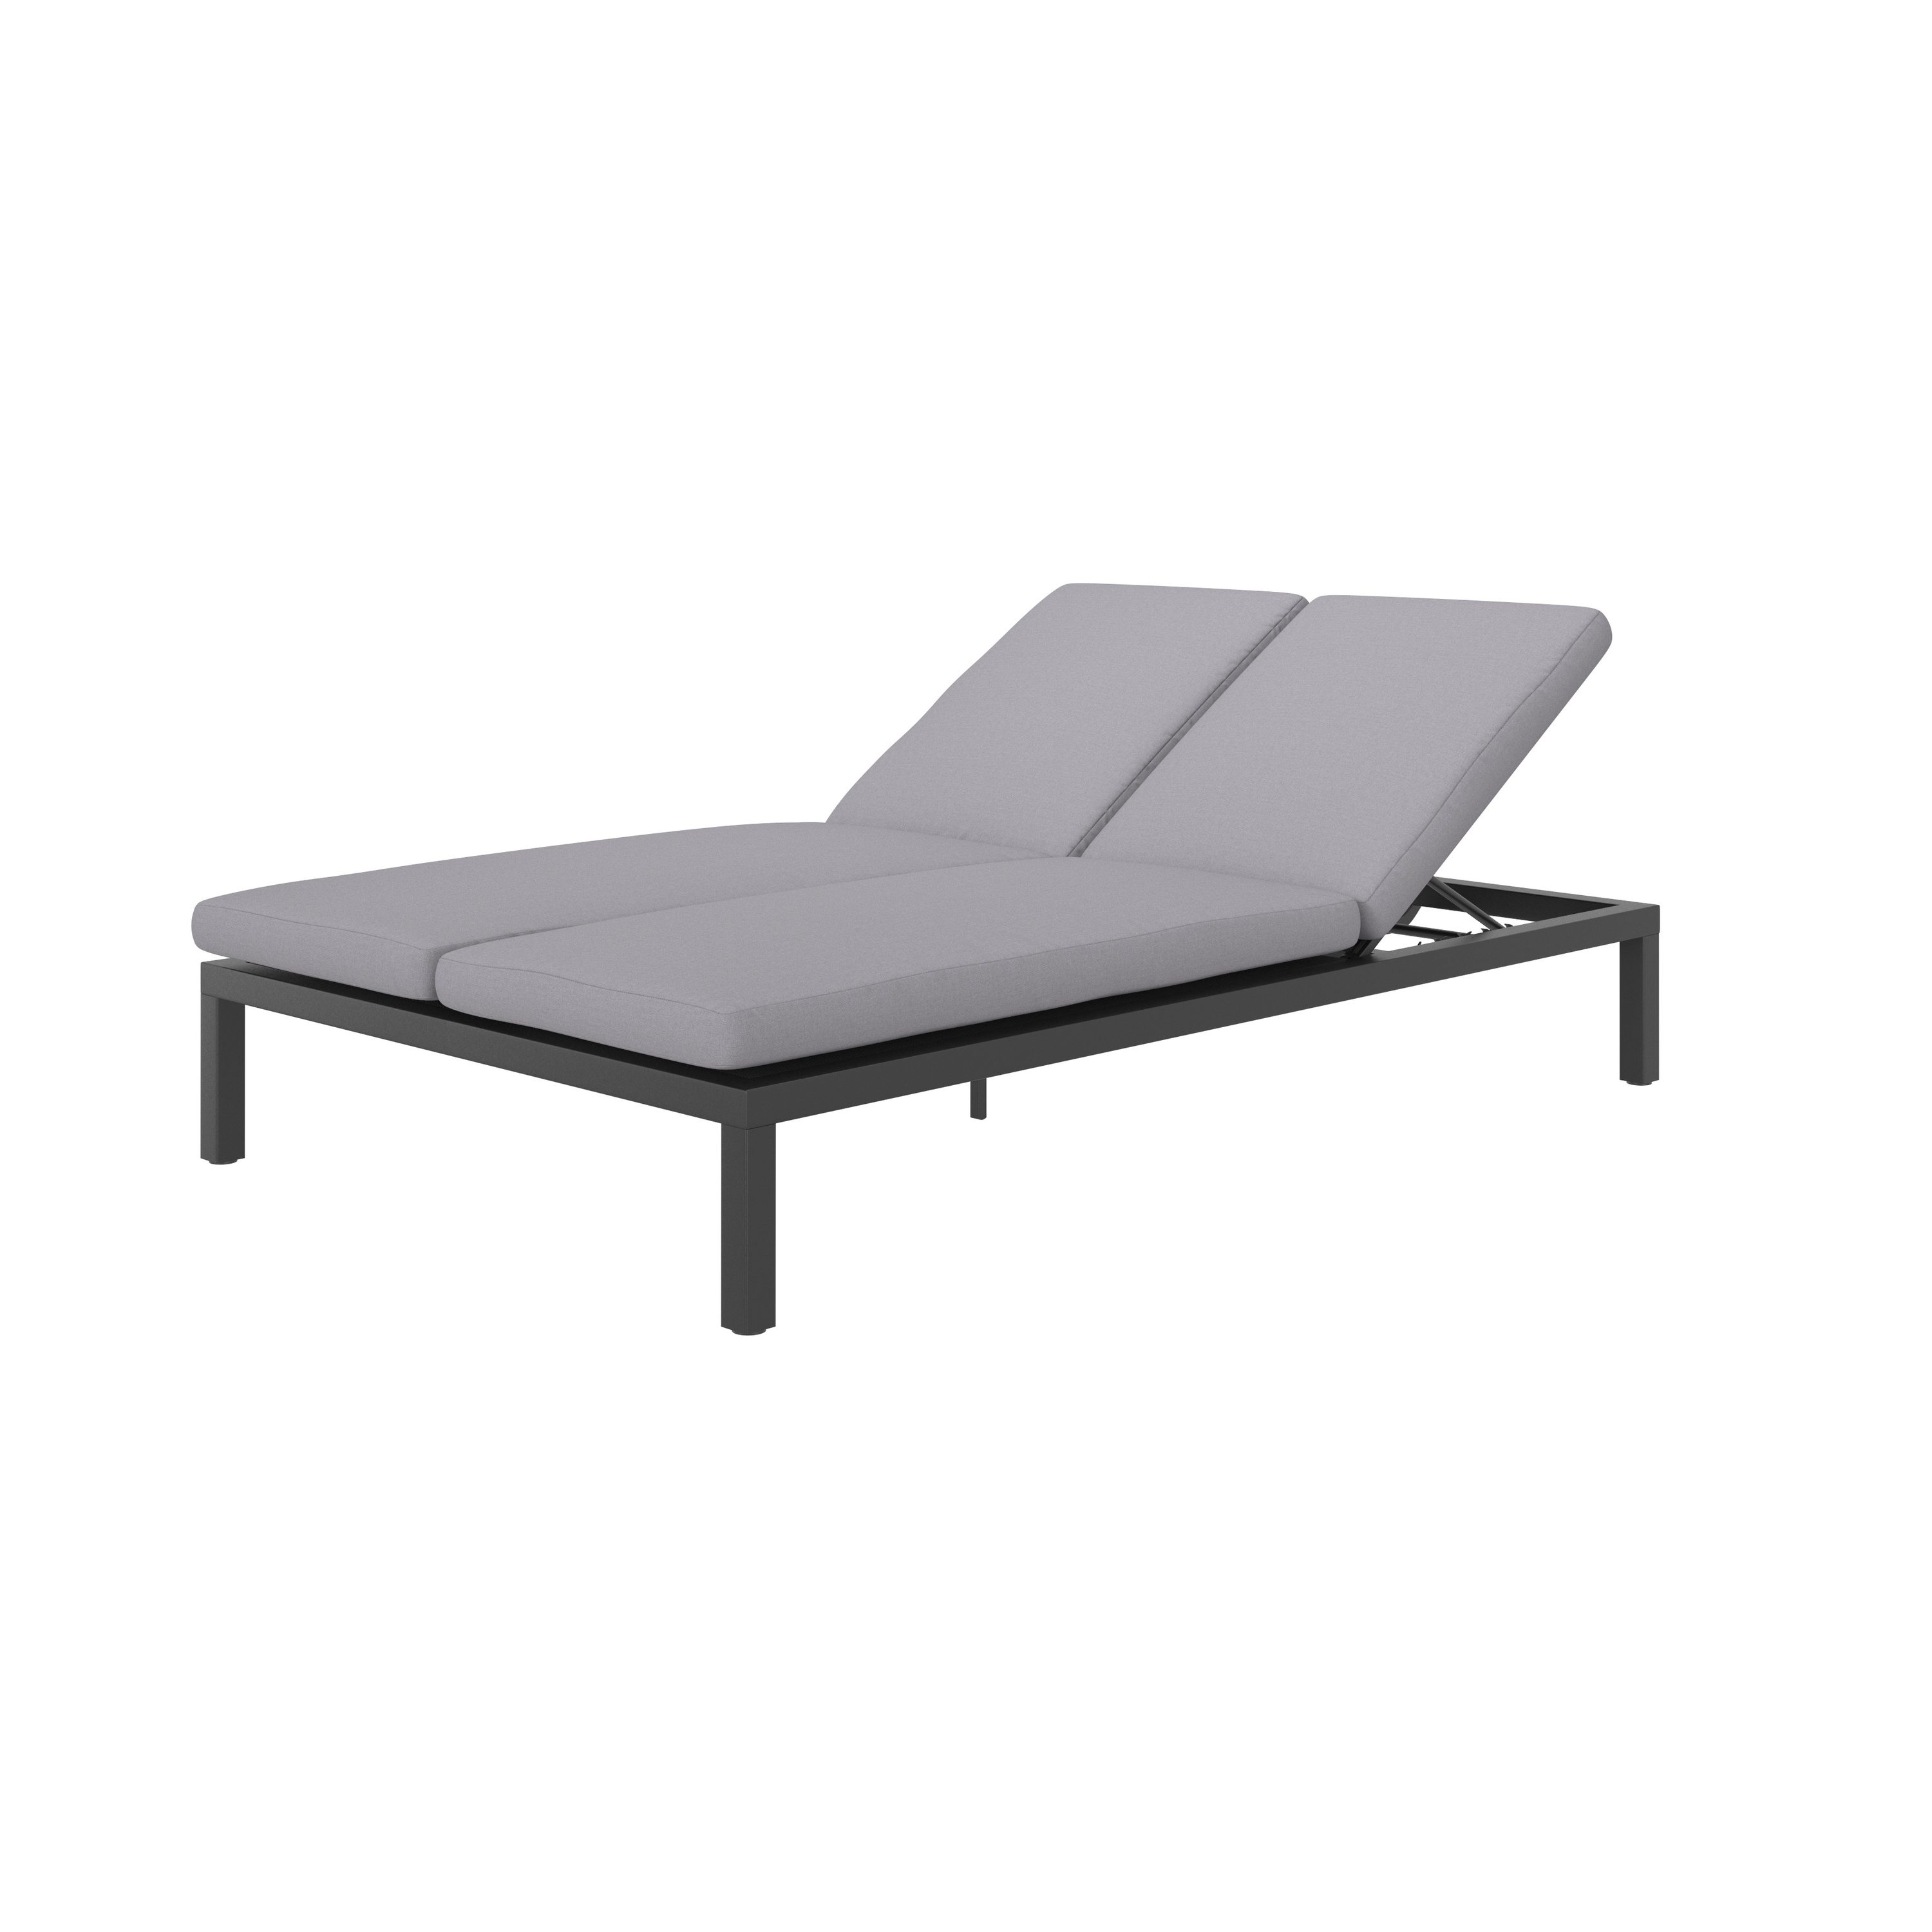 allen + roth Black Aluminum Frame Stationary Chaise Lounge Chair(s